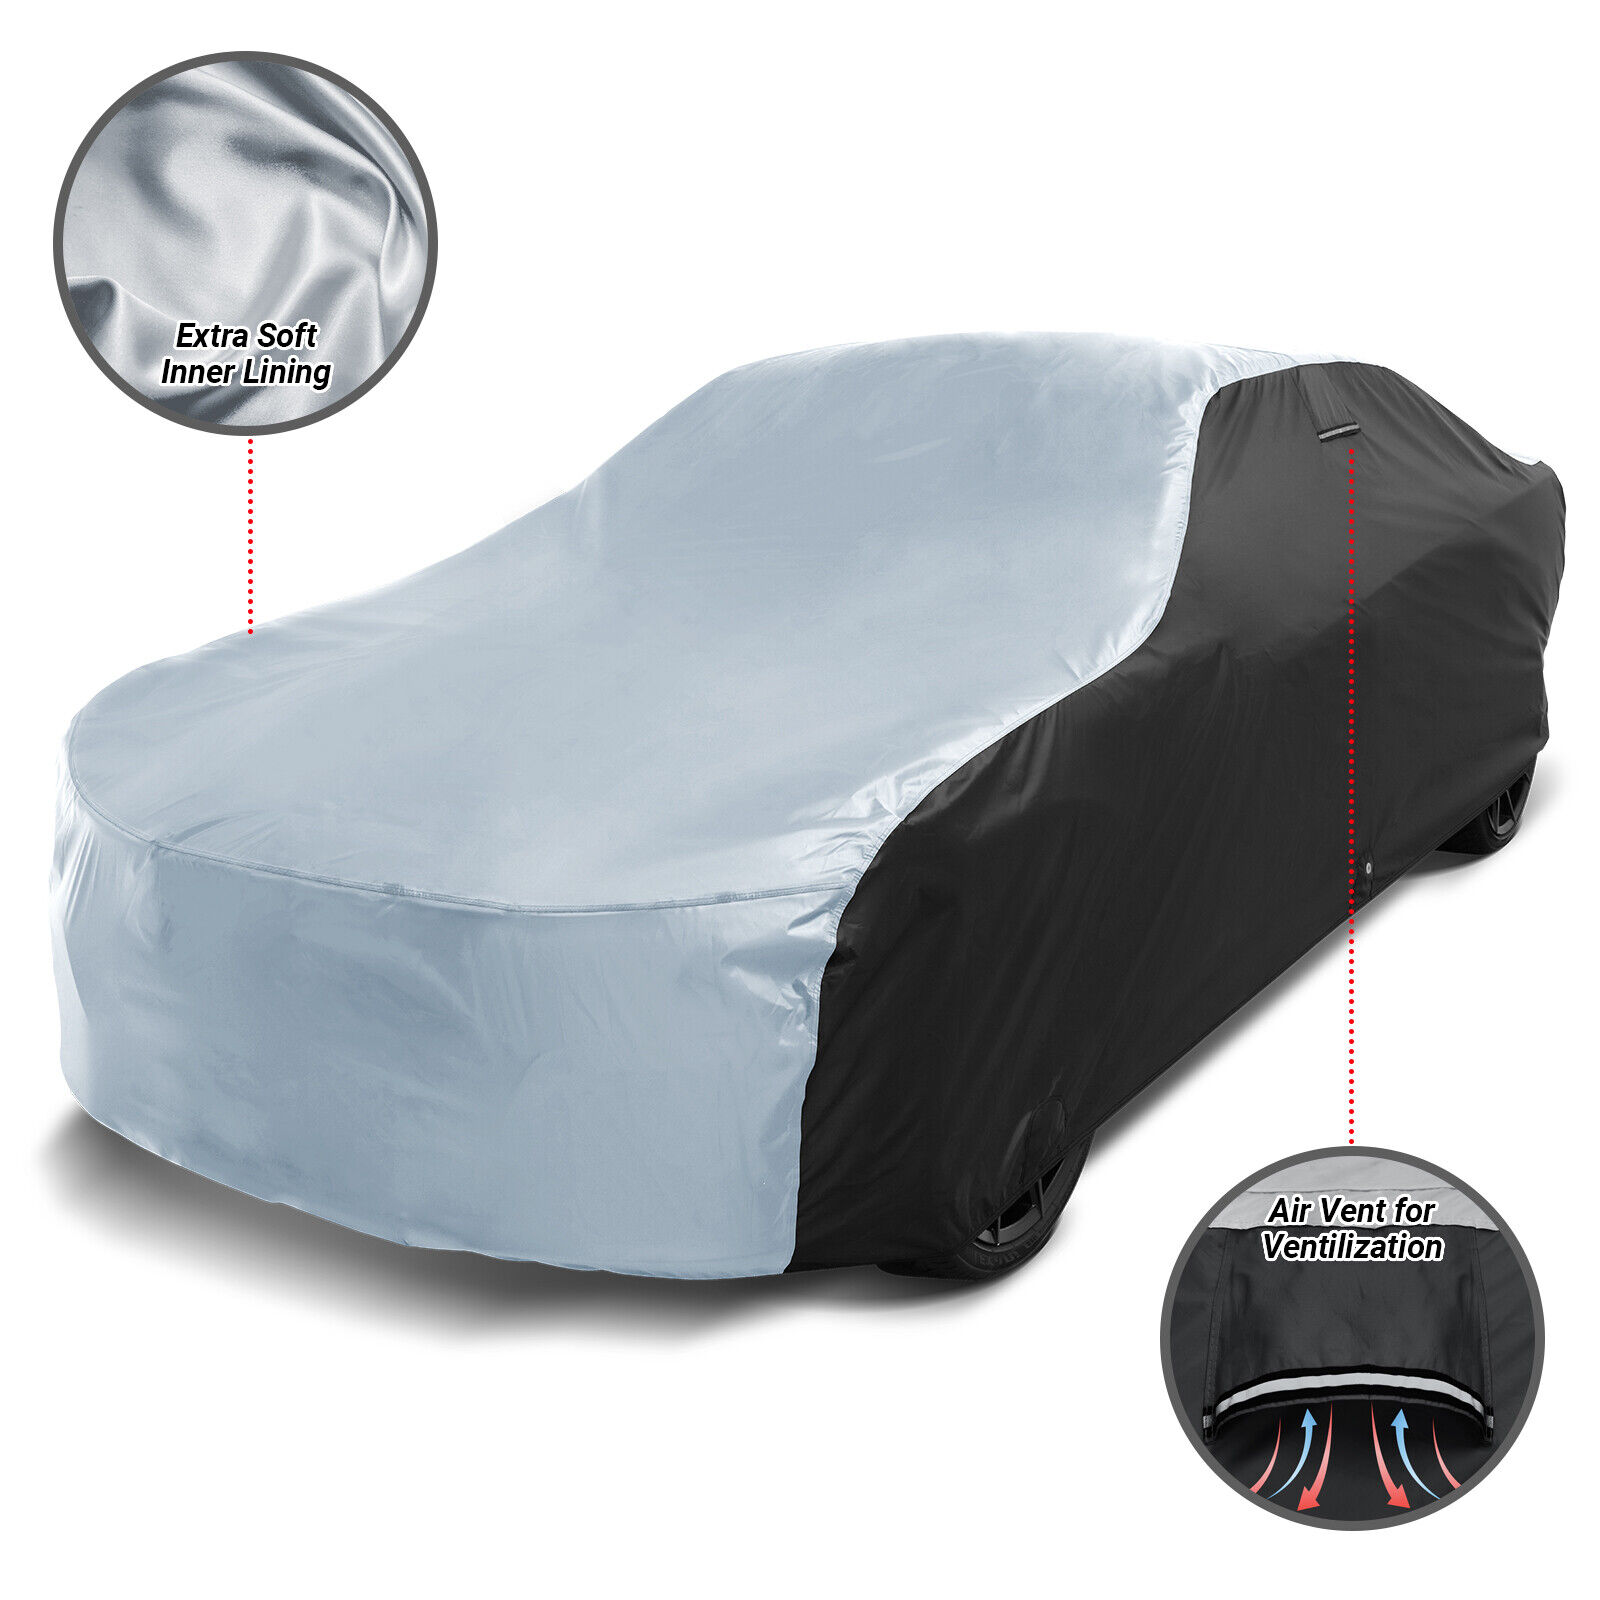 For FERRARI [MONDIAL] Custom-Fit Outdoor Waterproof All Weather Best Car Cover